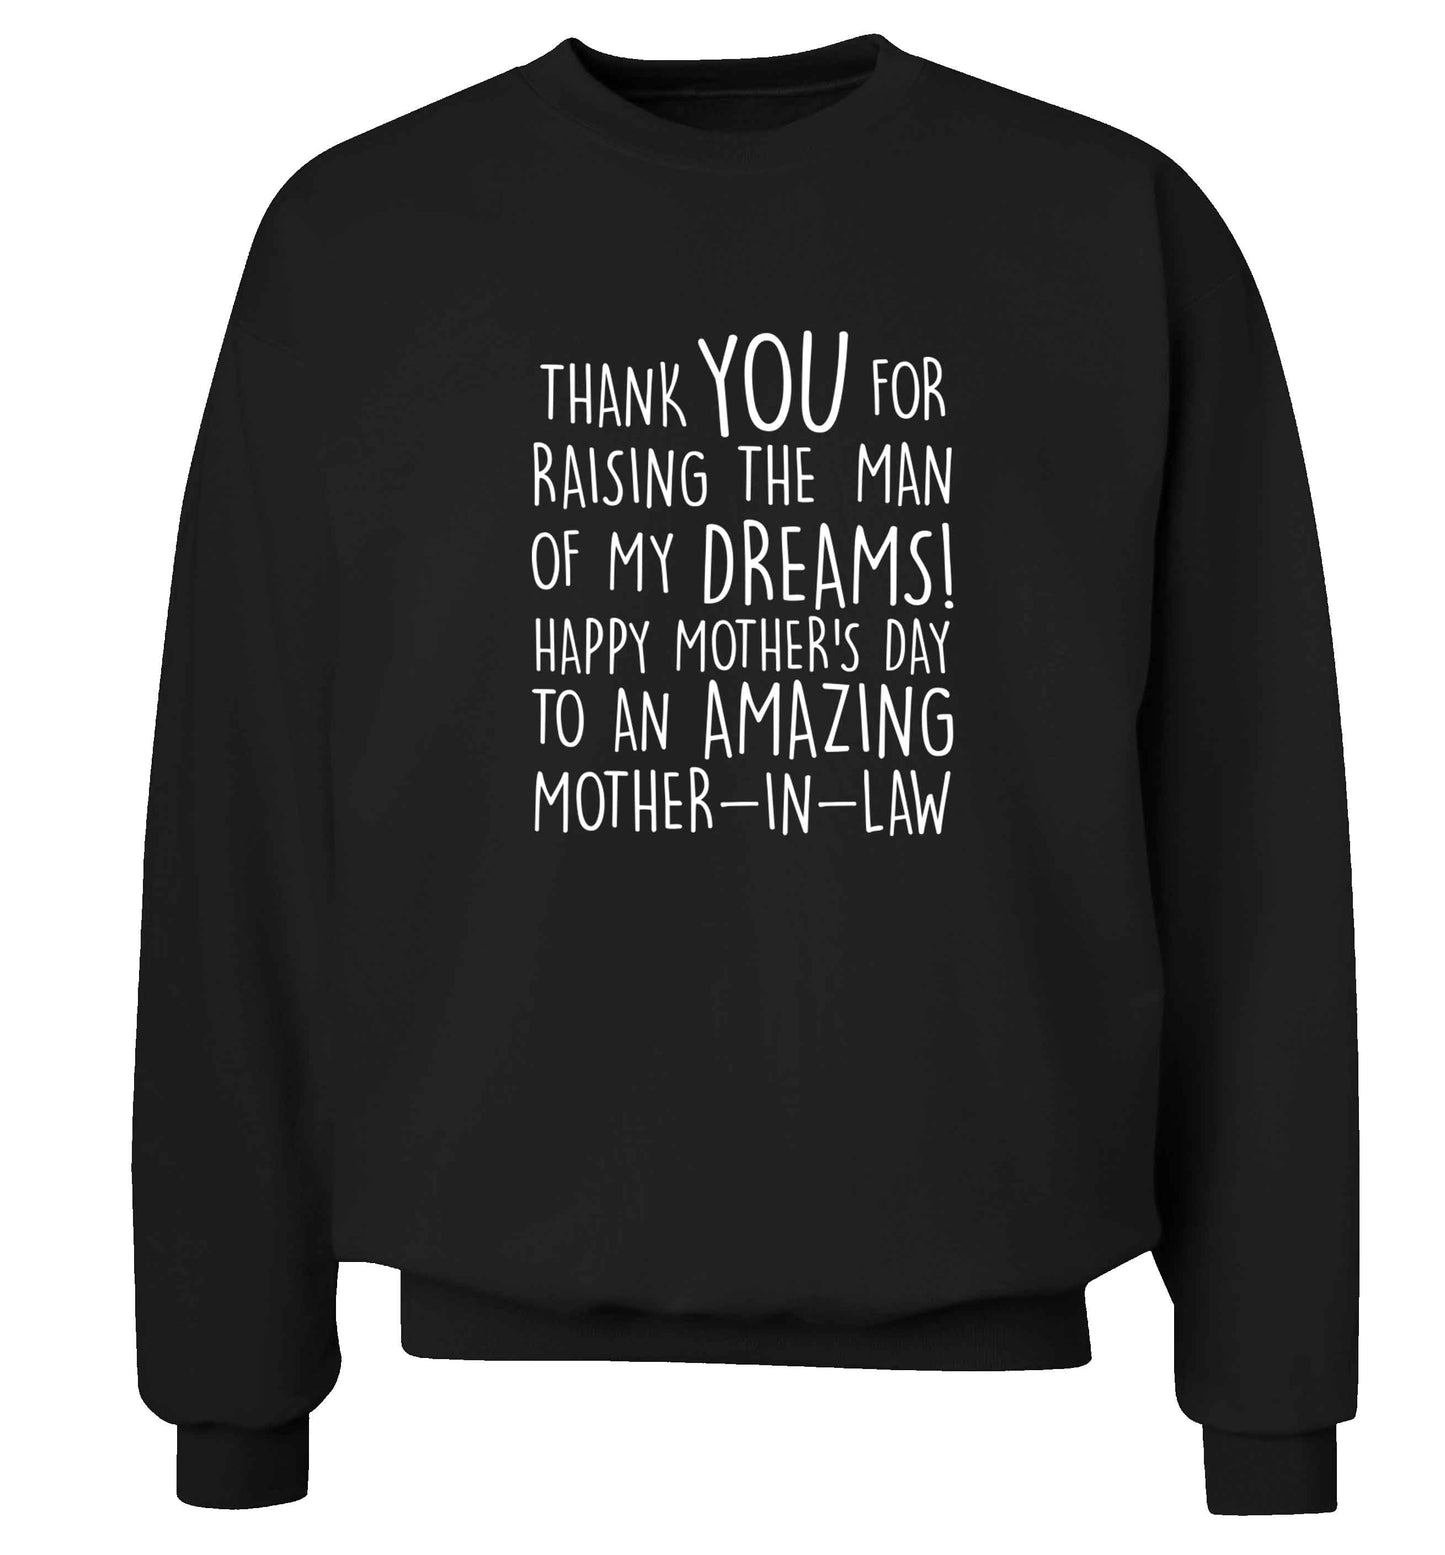 Raising the man of my dreams mother's day mother-in-law adult's unisex black sweater 2XL